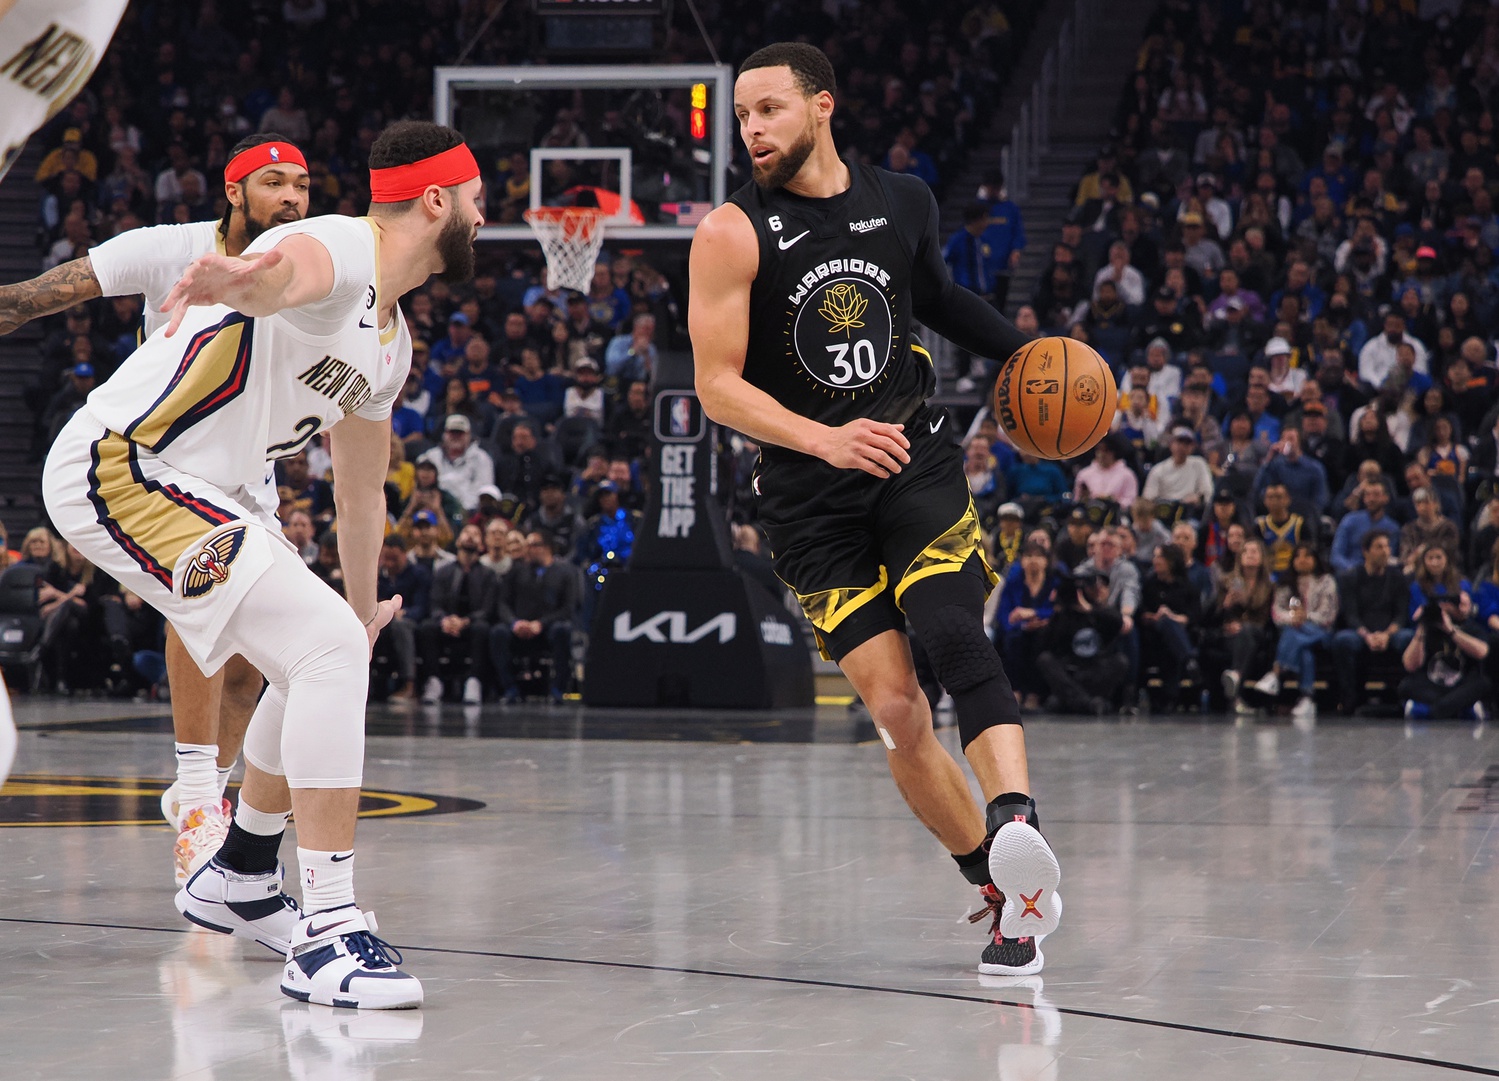 Game #3: New Orleans Pelicans vs Golden State Warriors